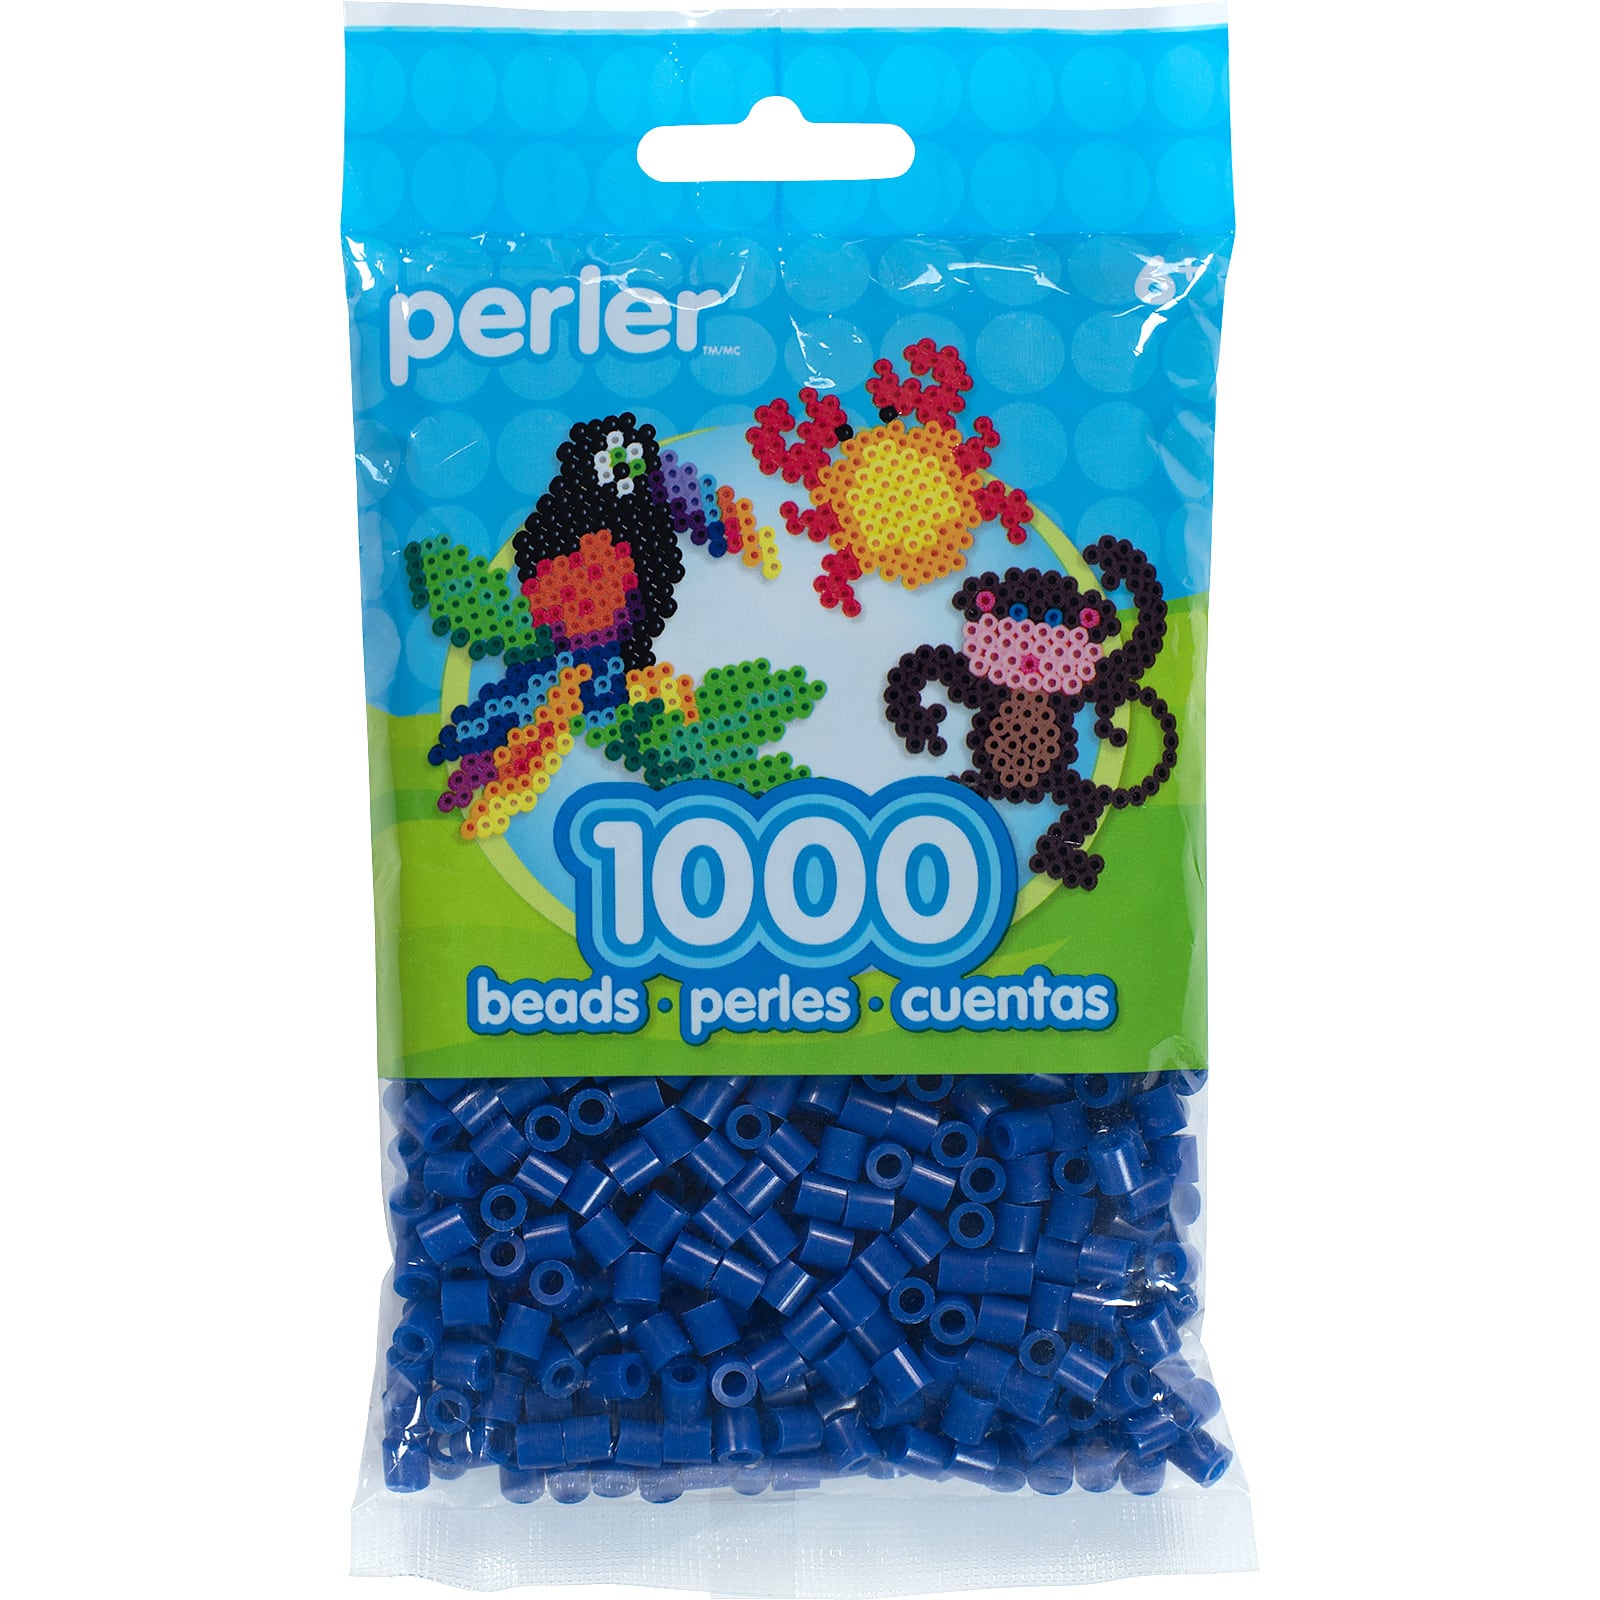 2,000 Blue Fuse Beads 5 x 5mm Bulk Pack of Fusion Beads Works with Per —  Craft Making Shop